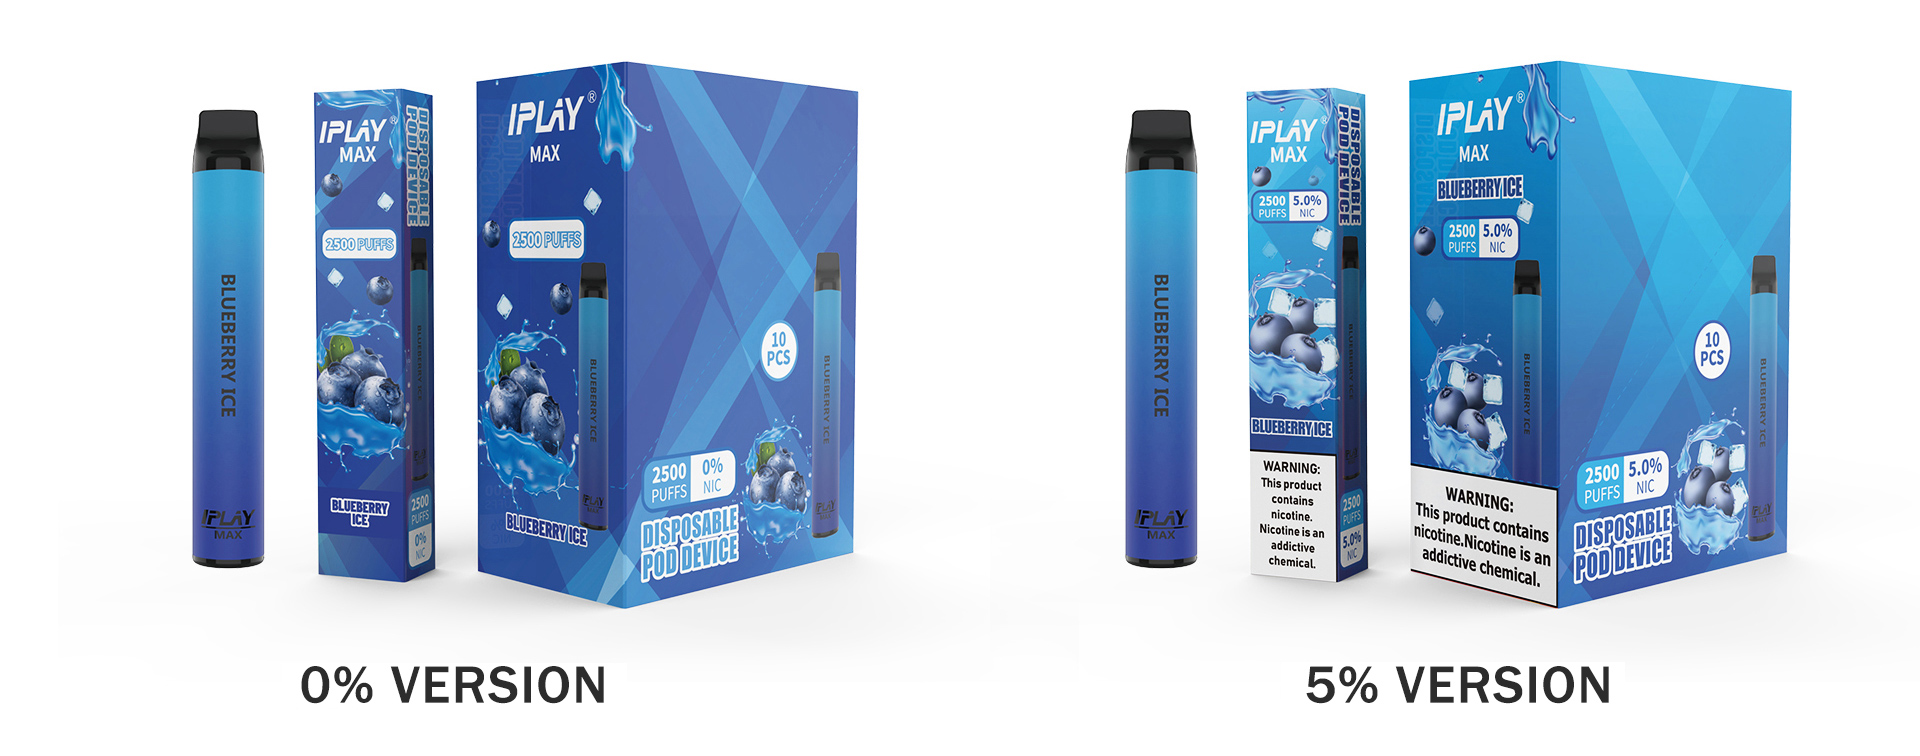 IPLAY MAX DISPOSABLE - PACKAGE VERSION